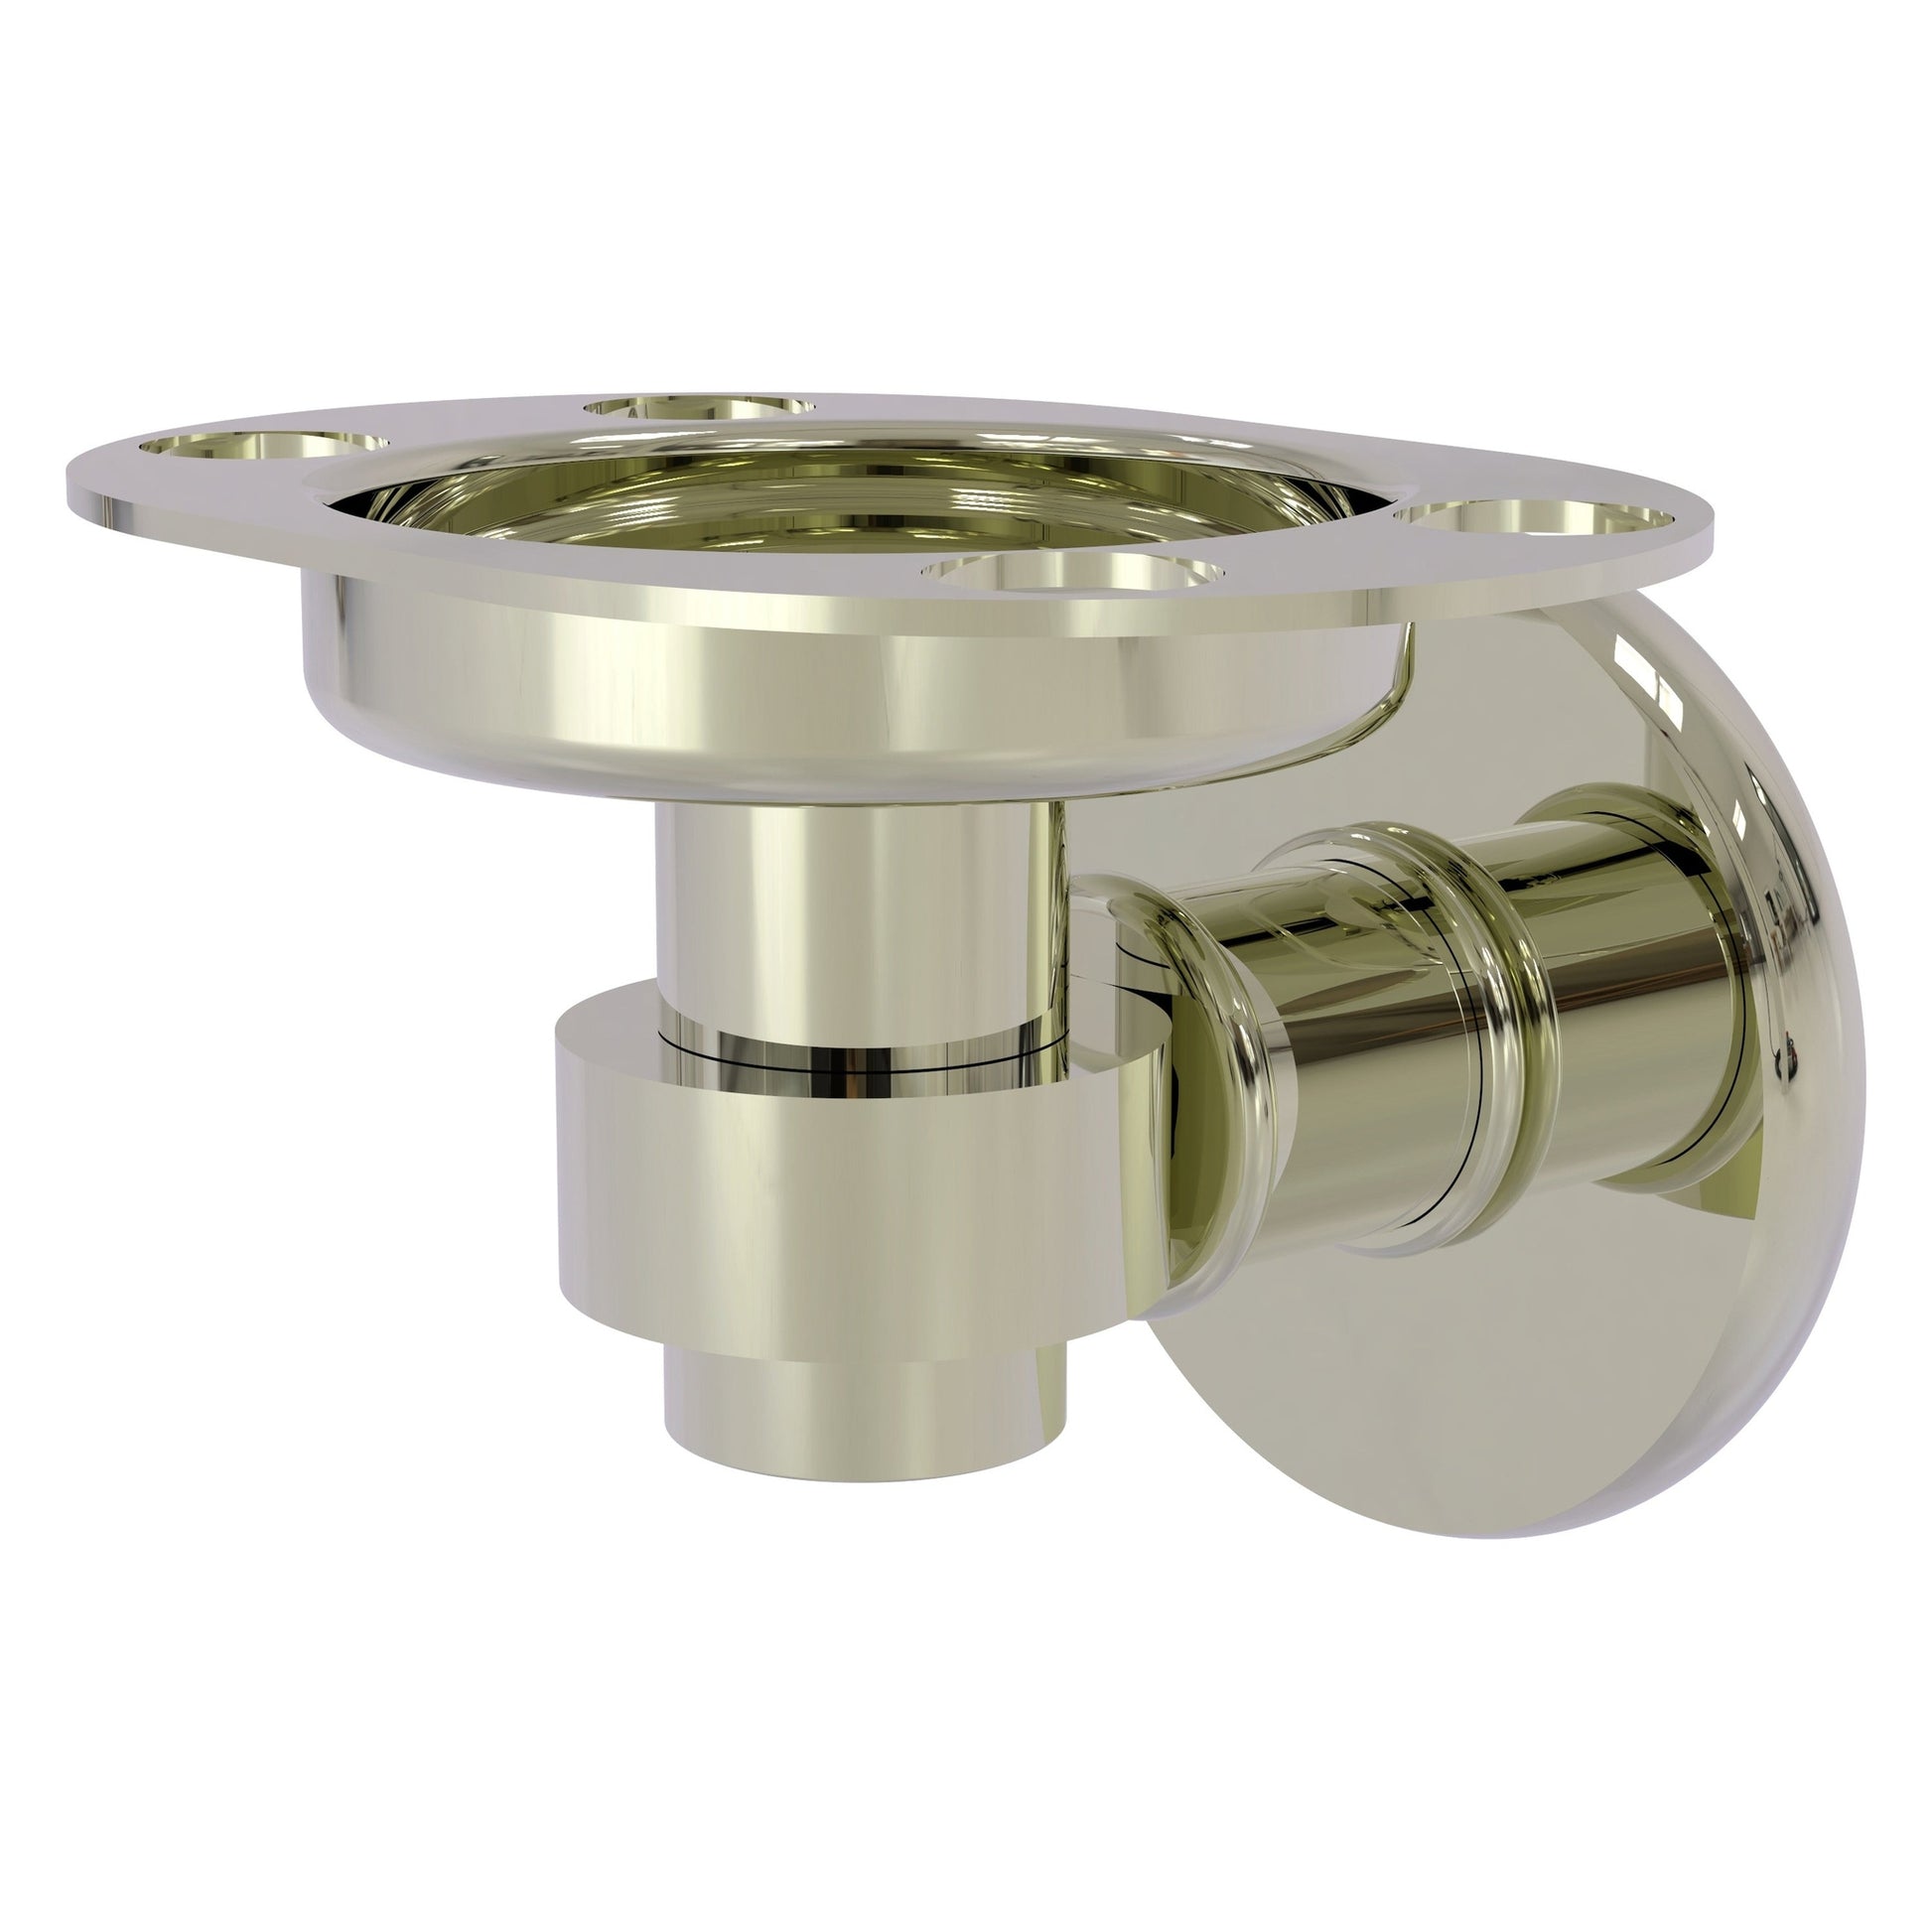 Allied Brass Continental 4.5" x 3.5" Polished Nickel Solid Brass Tumbler Toothbrush Holder